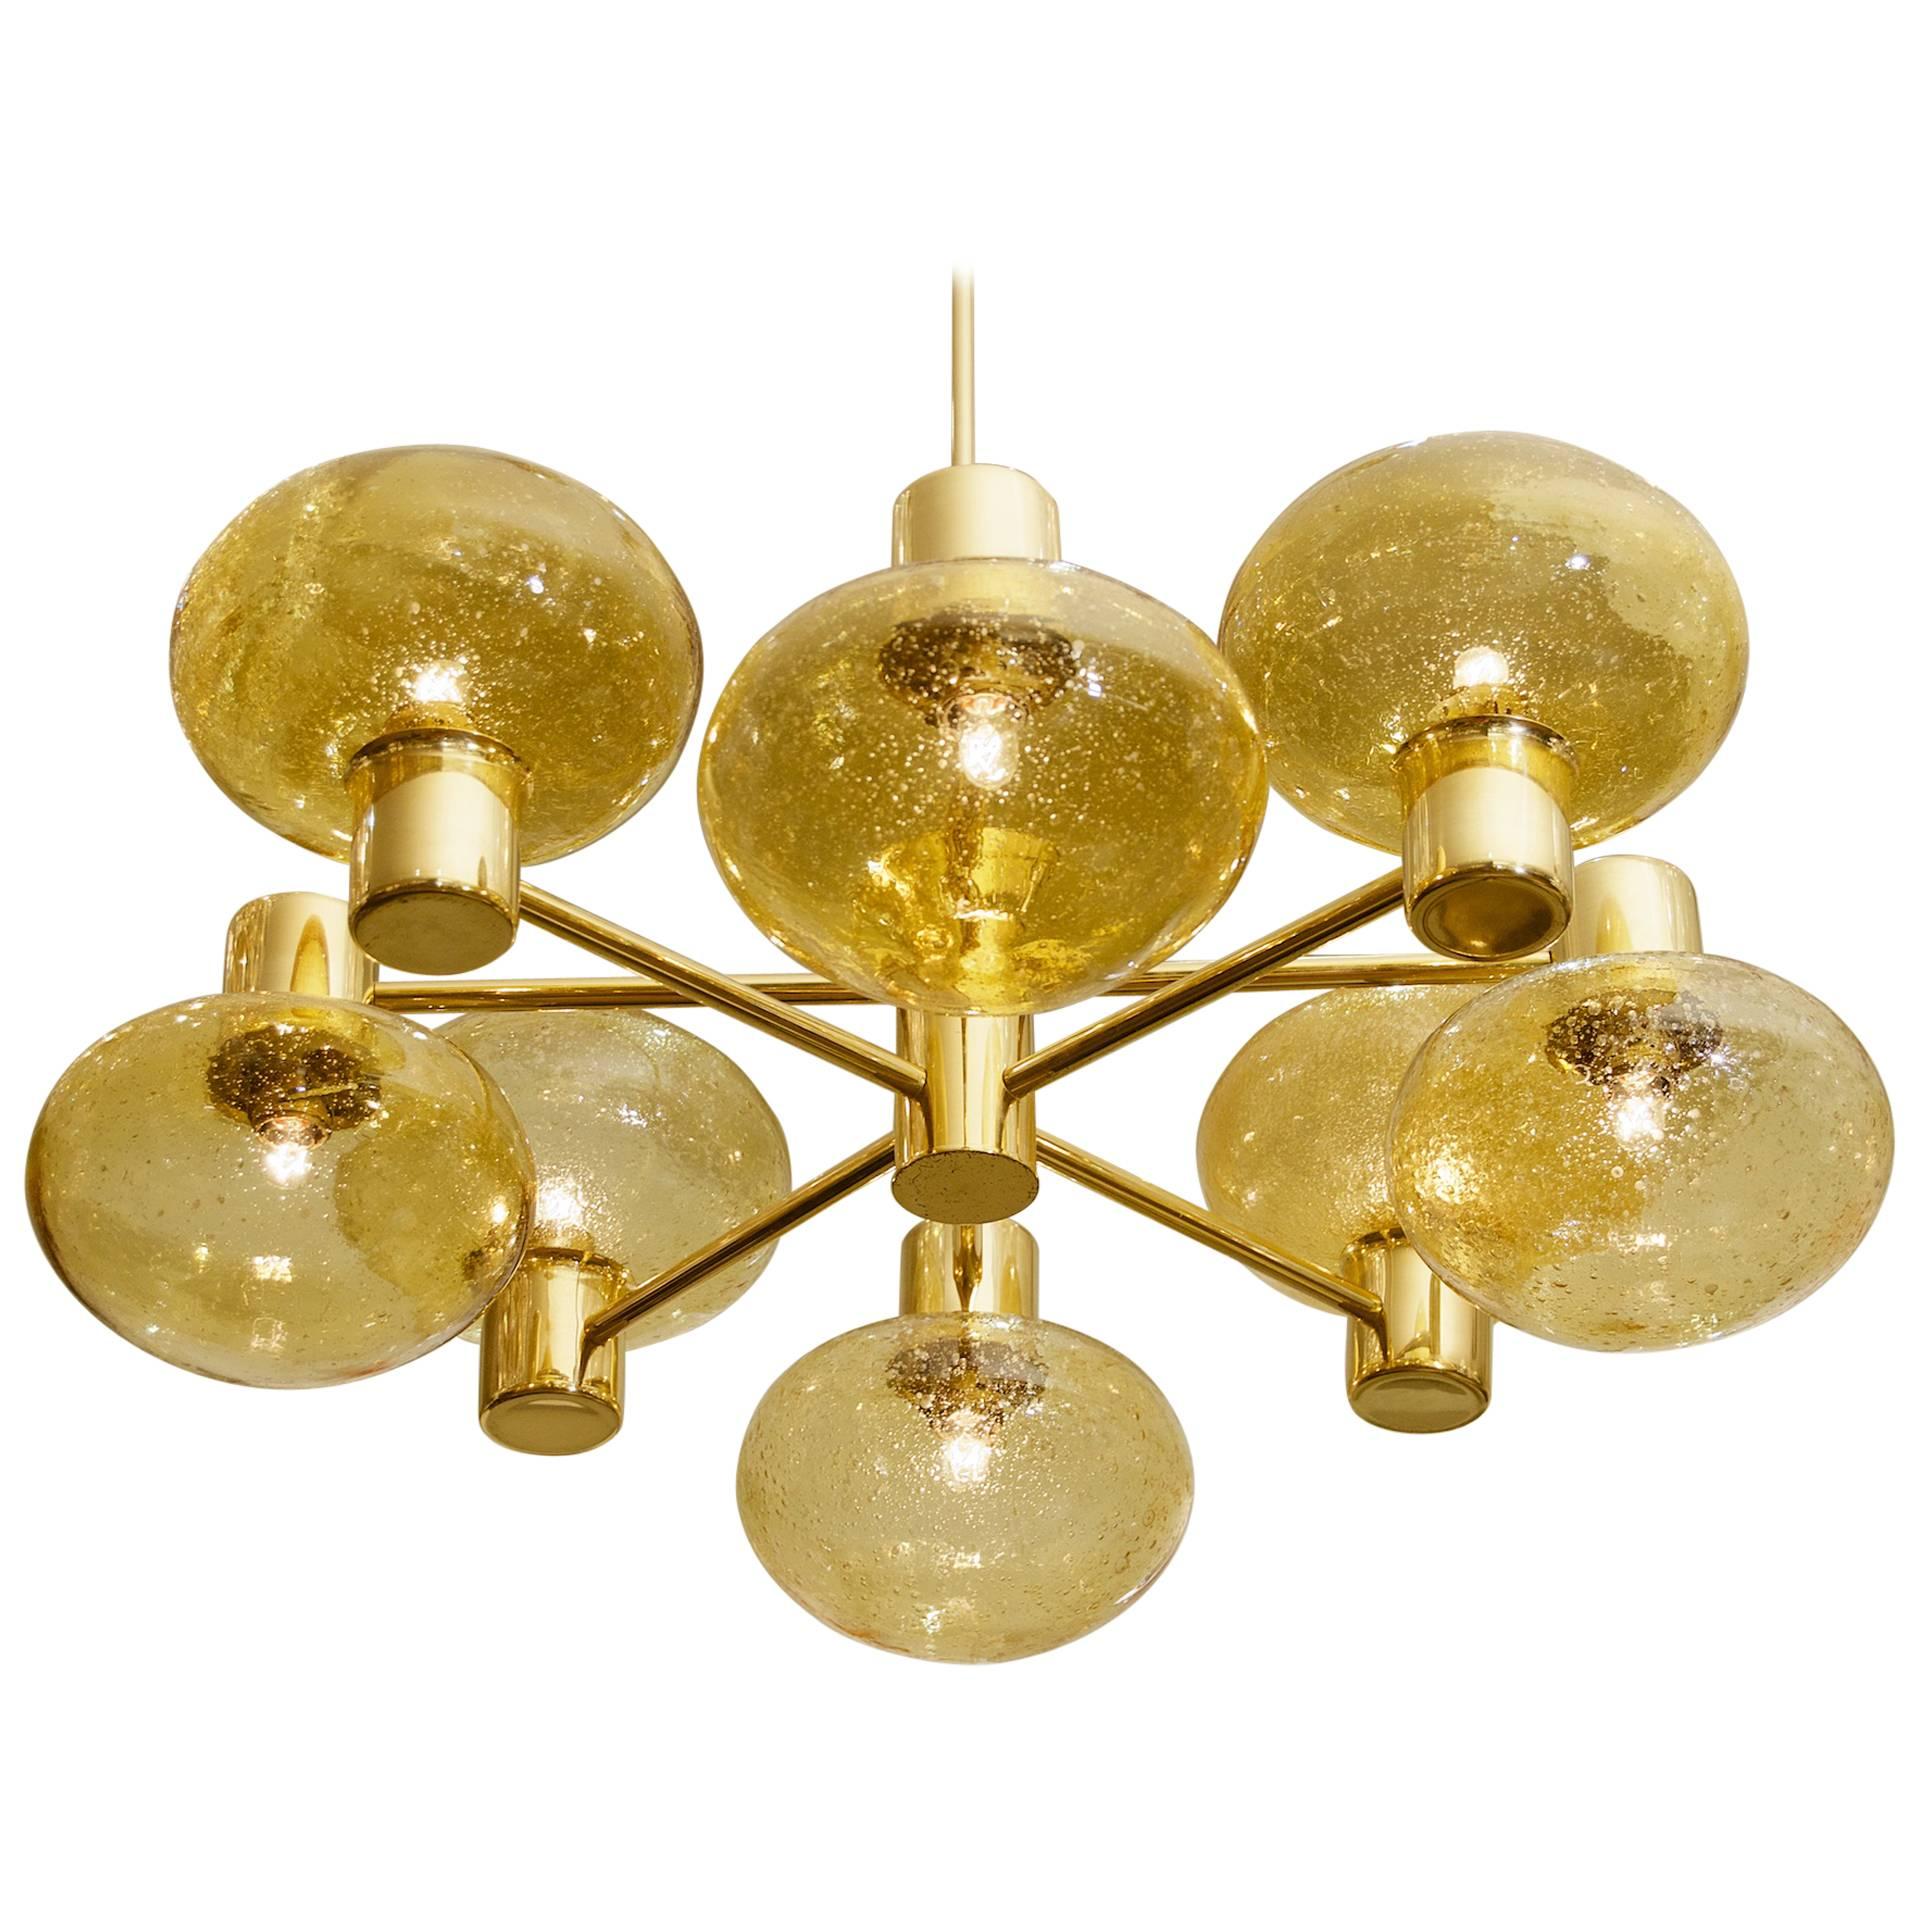 An elegant brass chandelier with two tiers comprised of four arms radiating from a central body, at the end of each arm is a blown glass amber globe, certain to add warmth to any room. 

Takes eight E-14 base bulbs up to 40 watts per bulb.